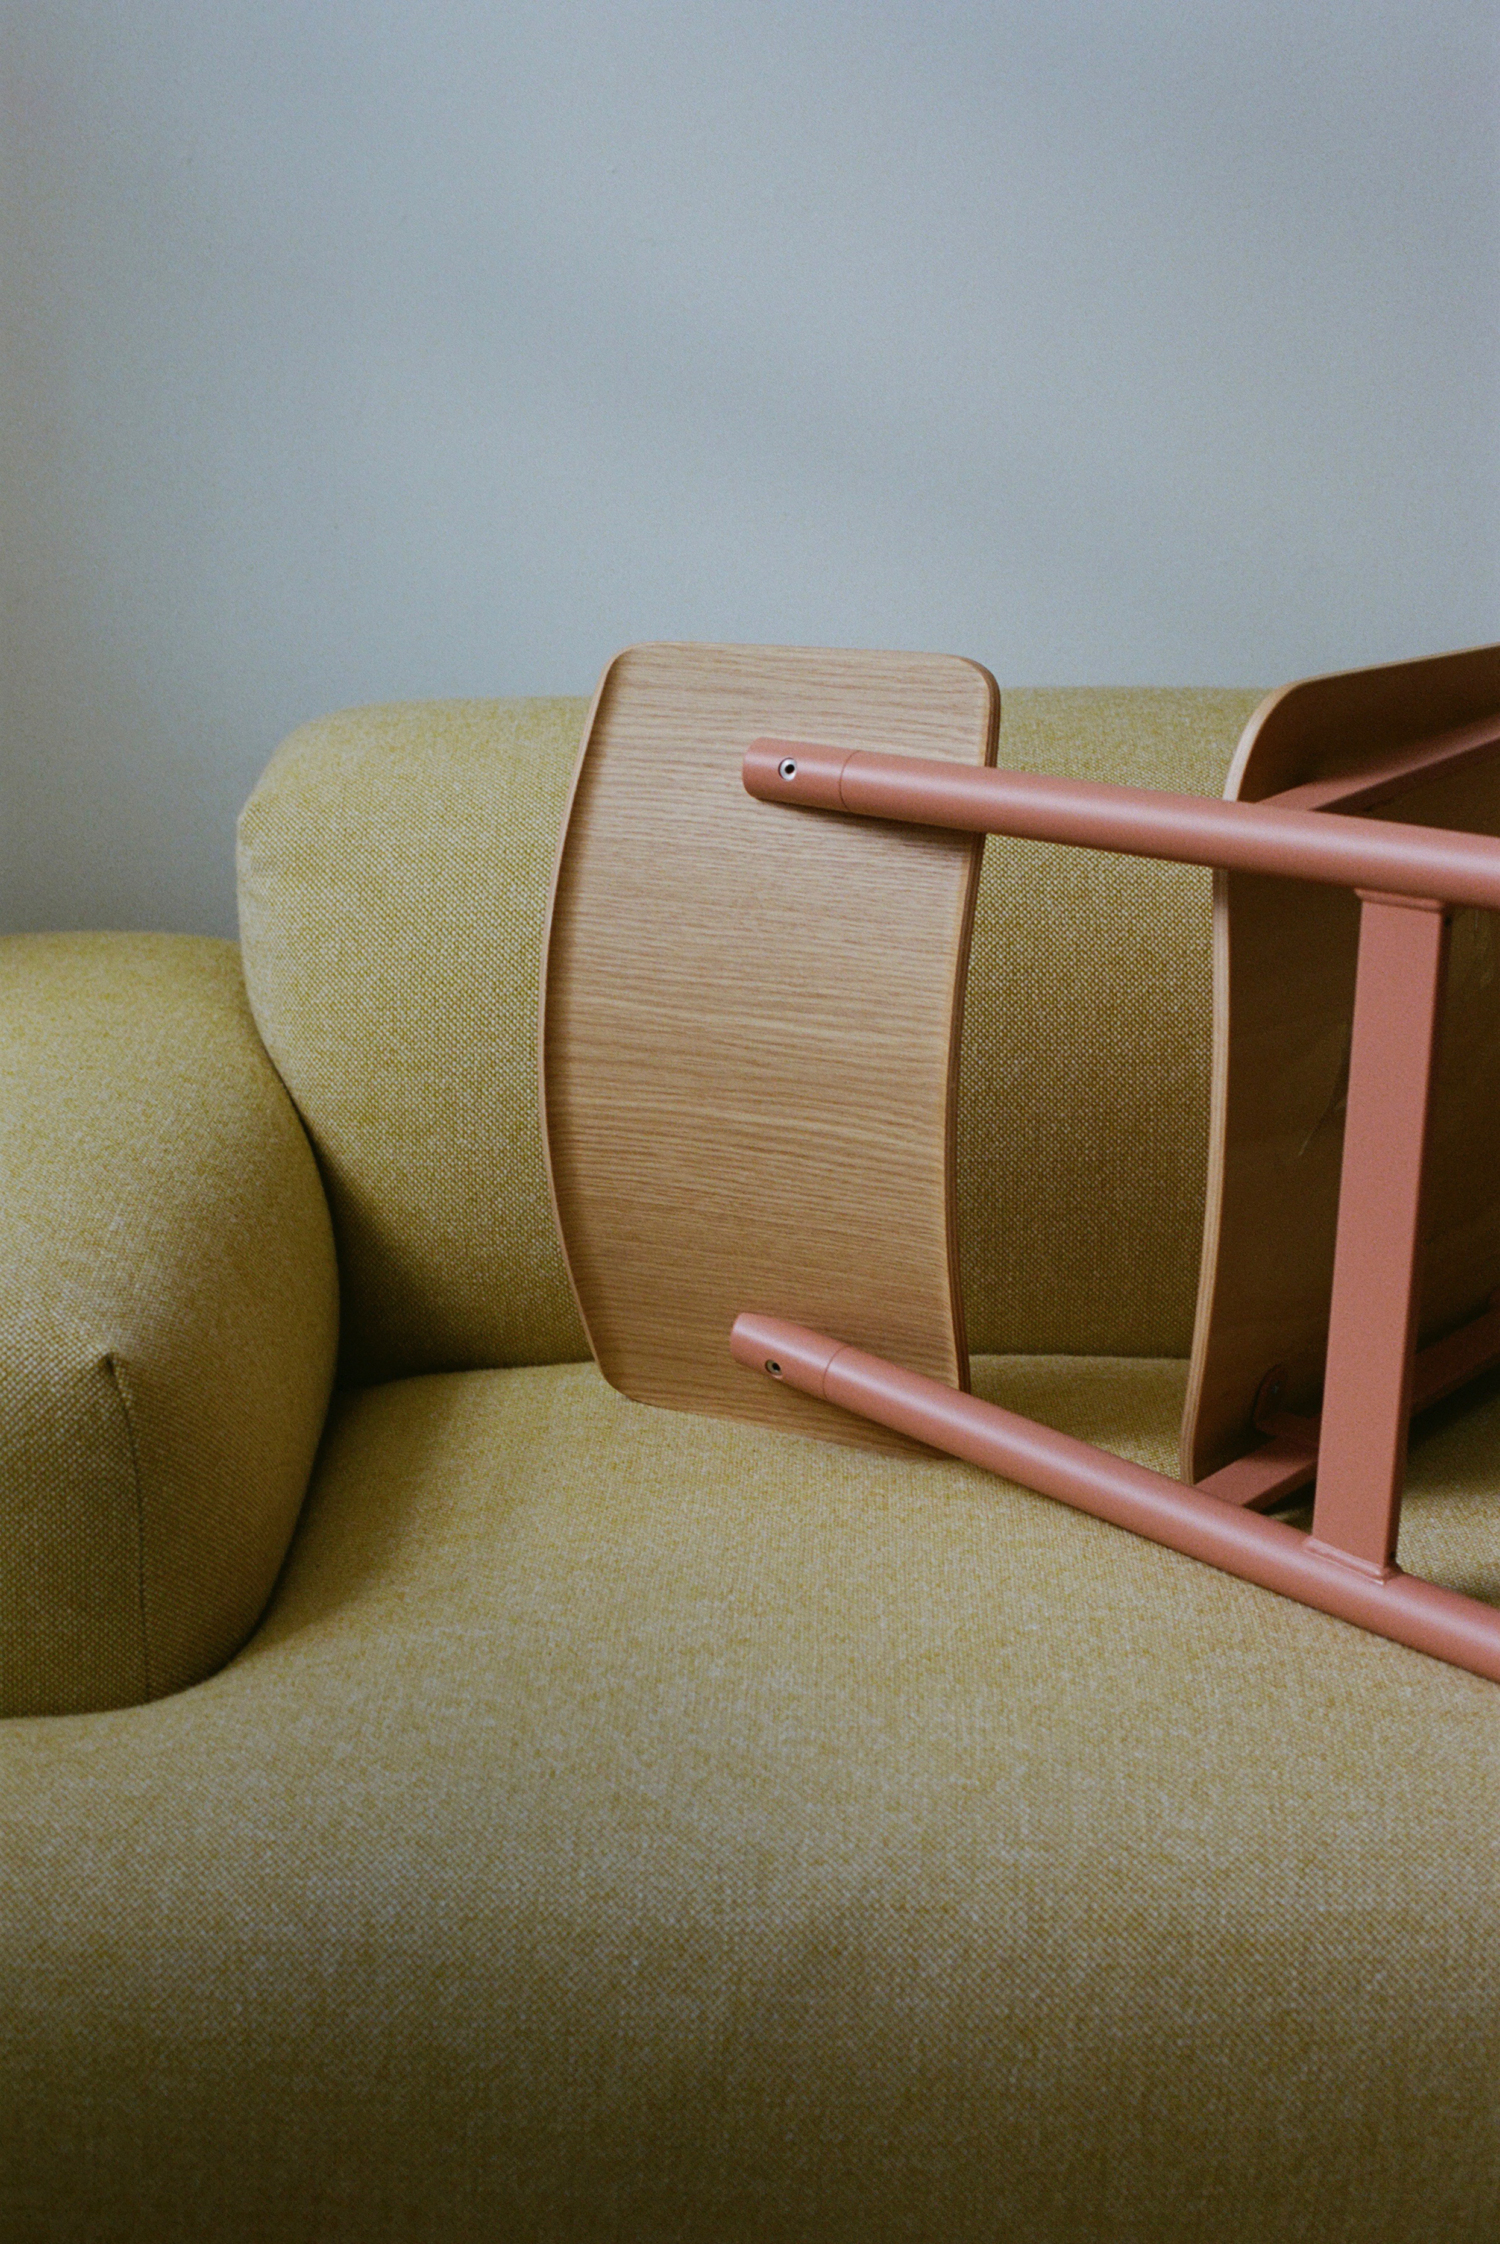 Photo Essay — There's My Chair, I Put It There by Tanya & Zhenya Posternak